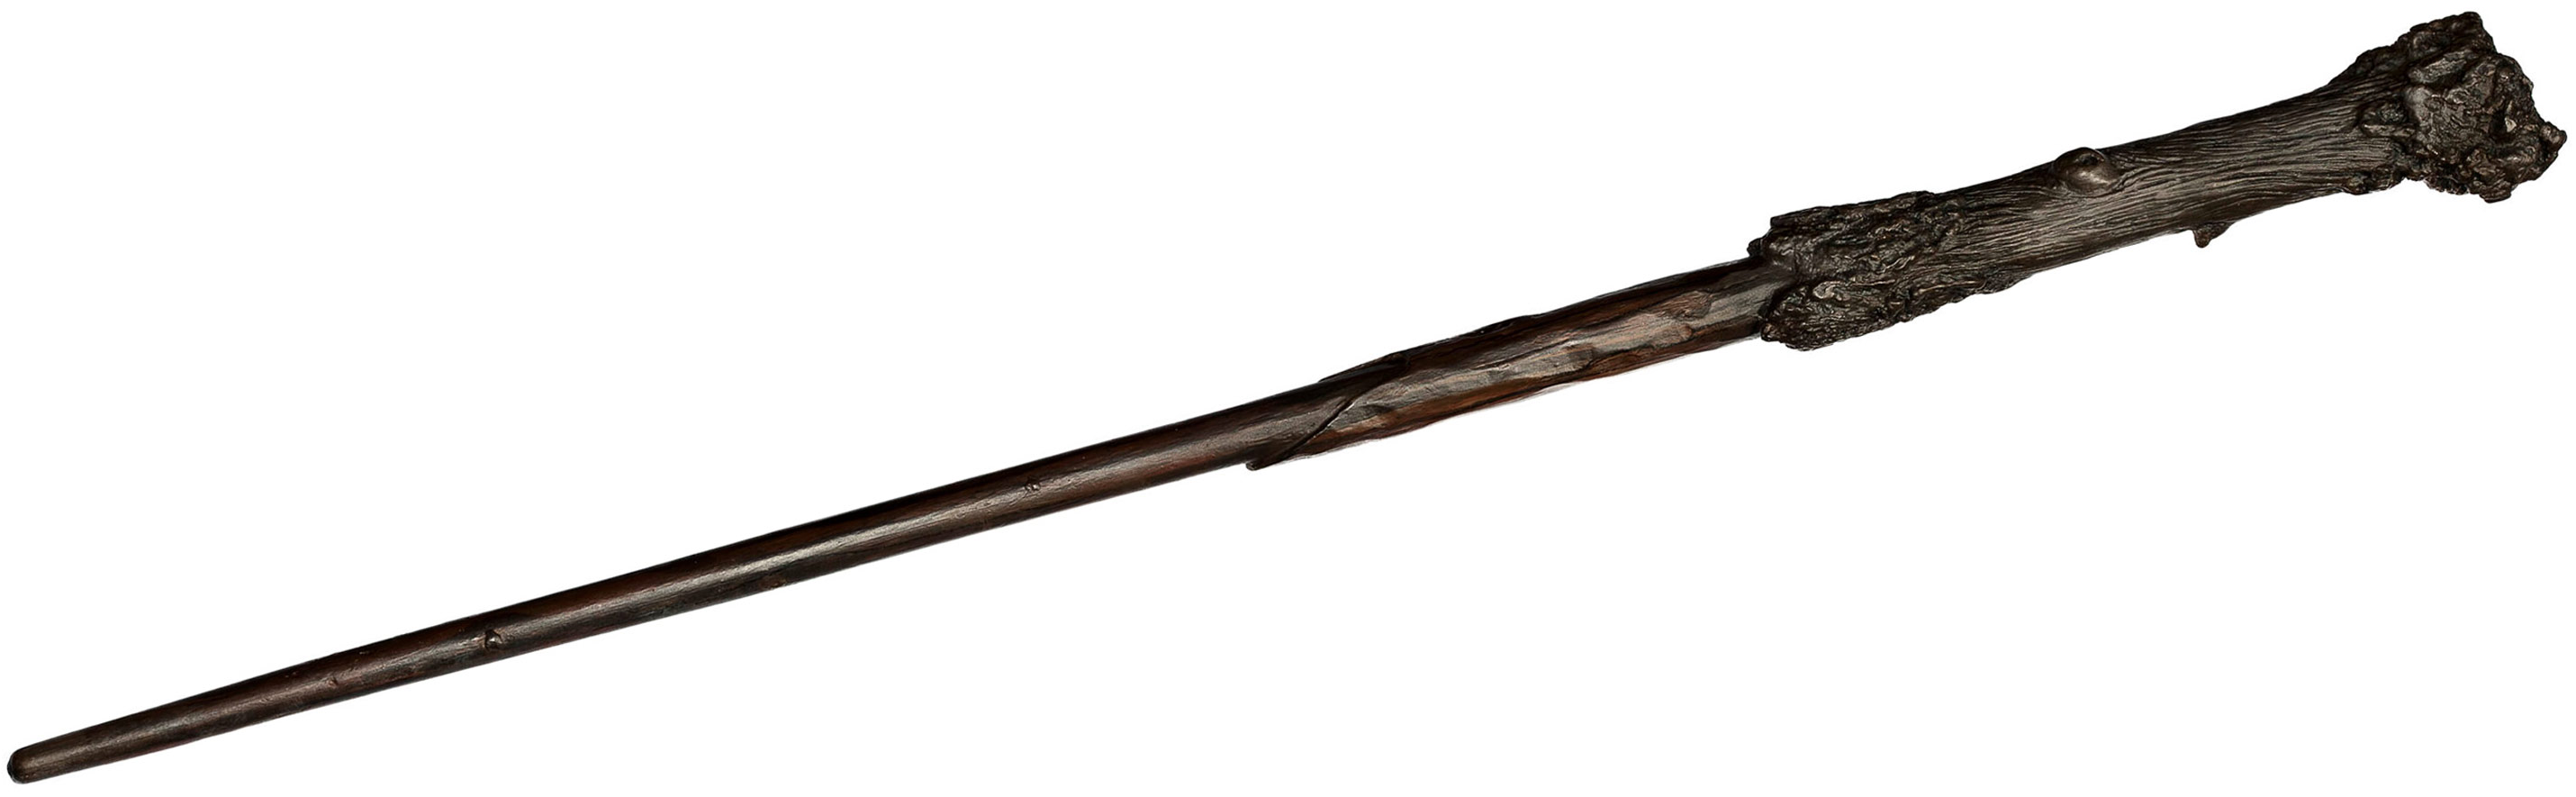 image-harry-potter-s-wand-png-harry-potter-wiki